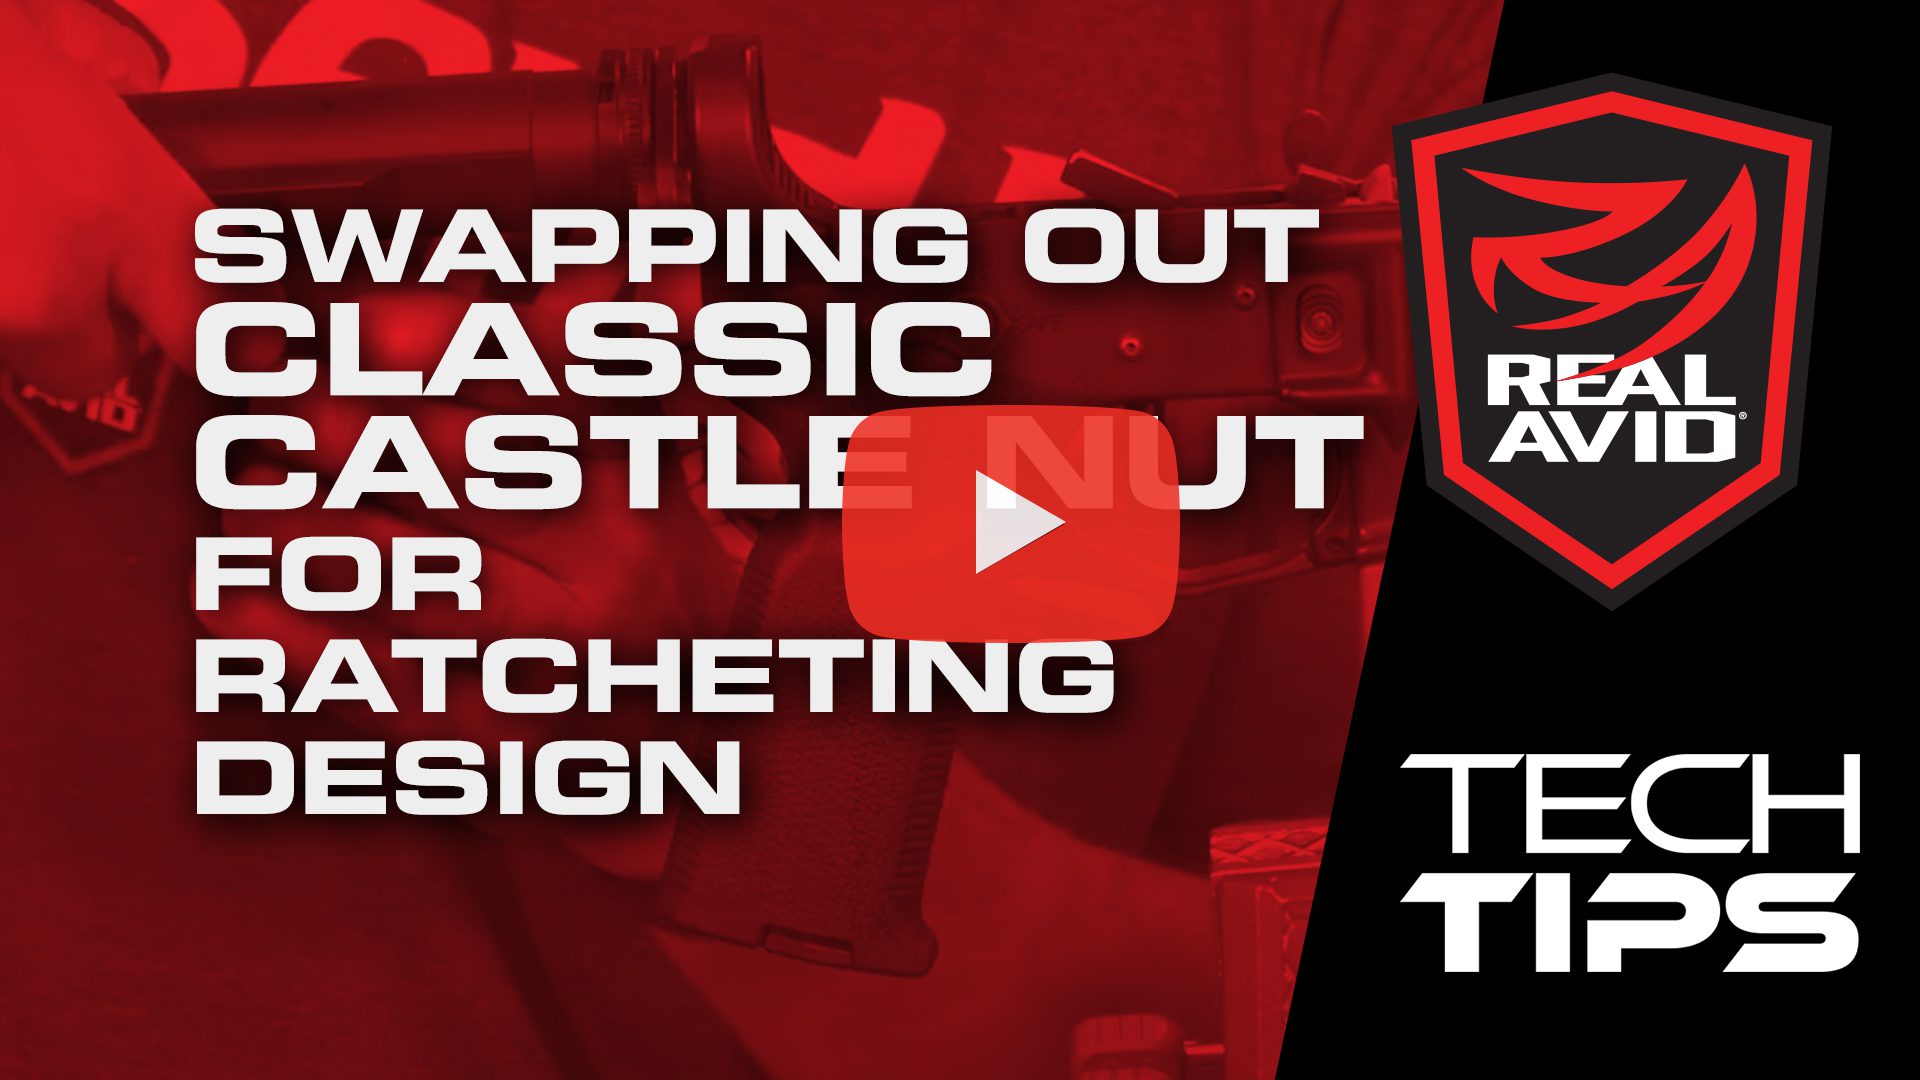 TECH TIPS: Swapping out Classic Castle Nut for Ratcheting Design